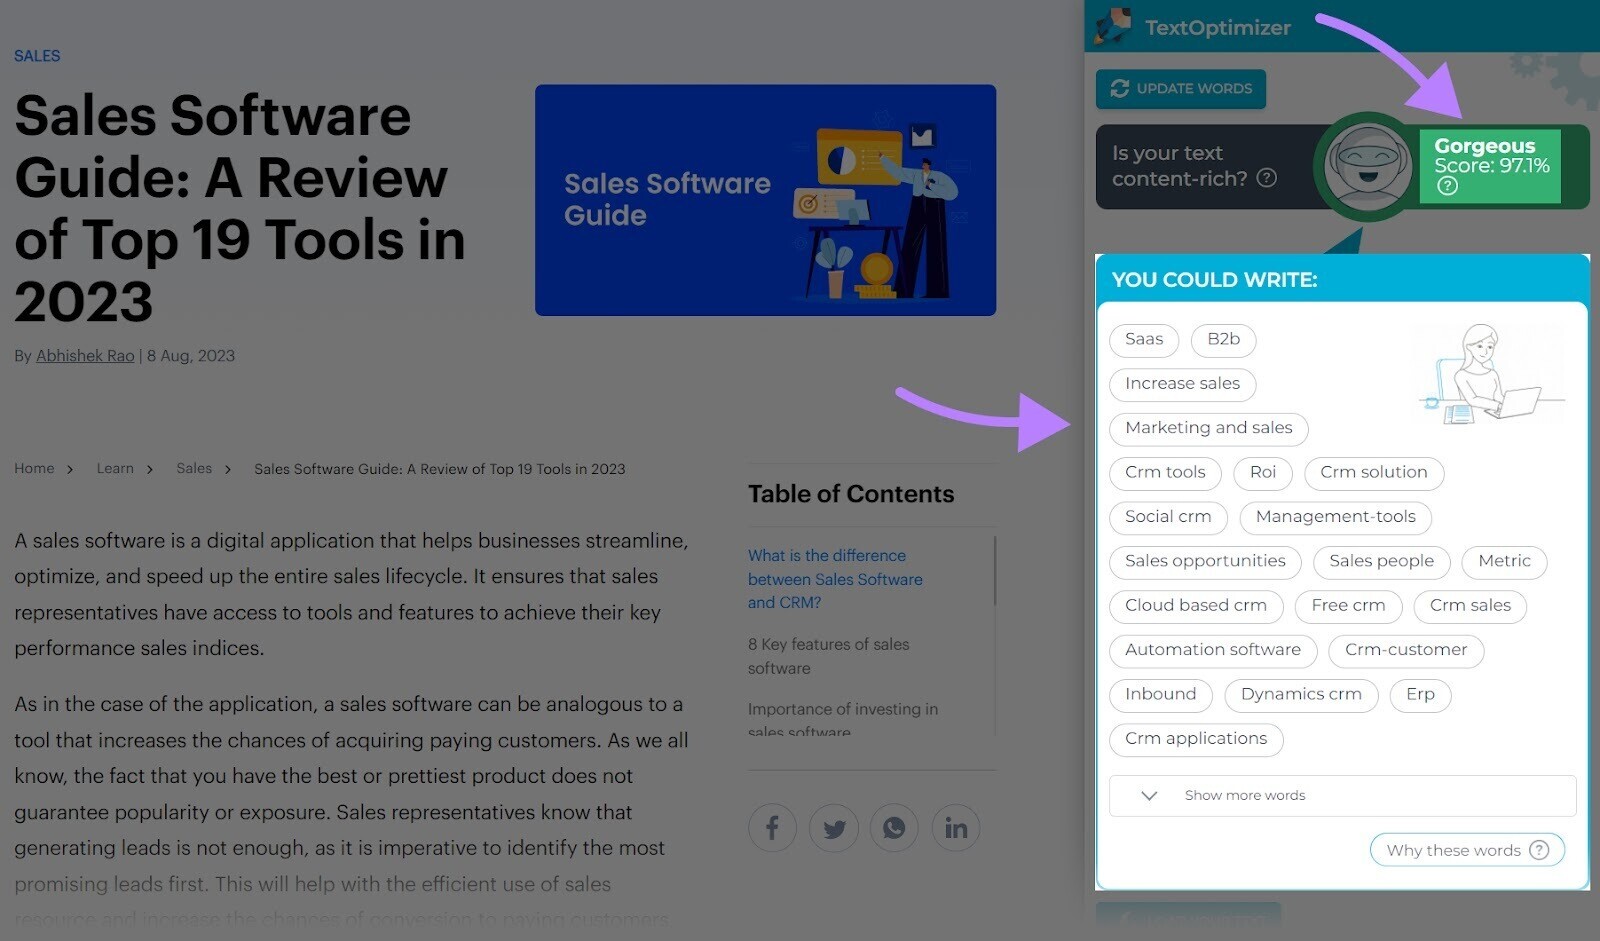 TextOptimizer provides useful recommendations for optimizing your content